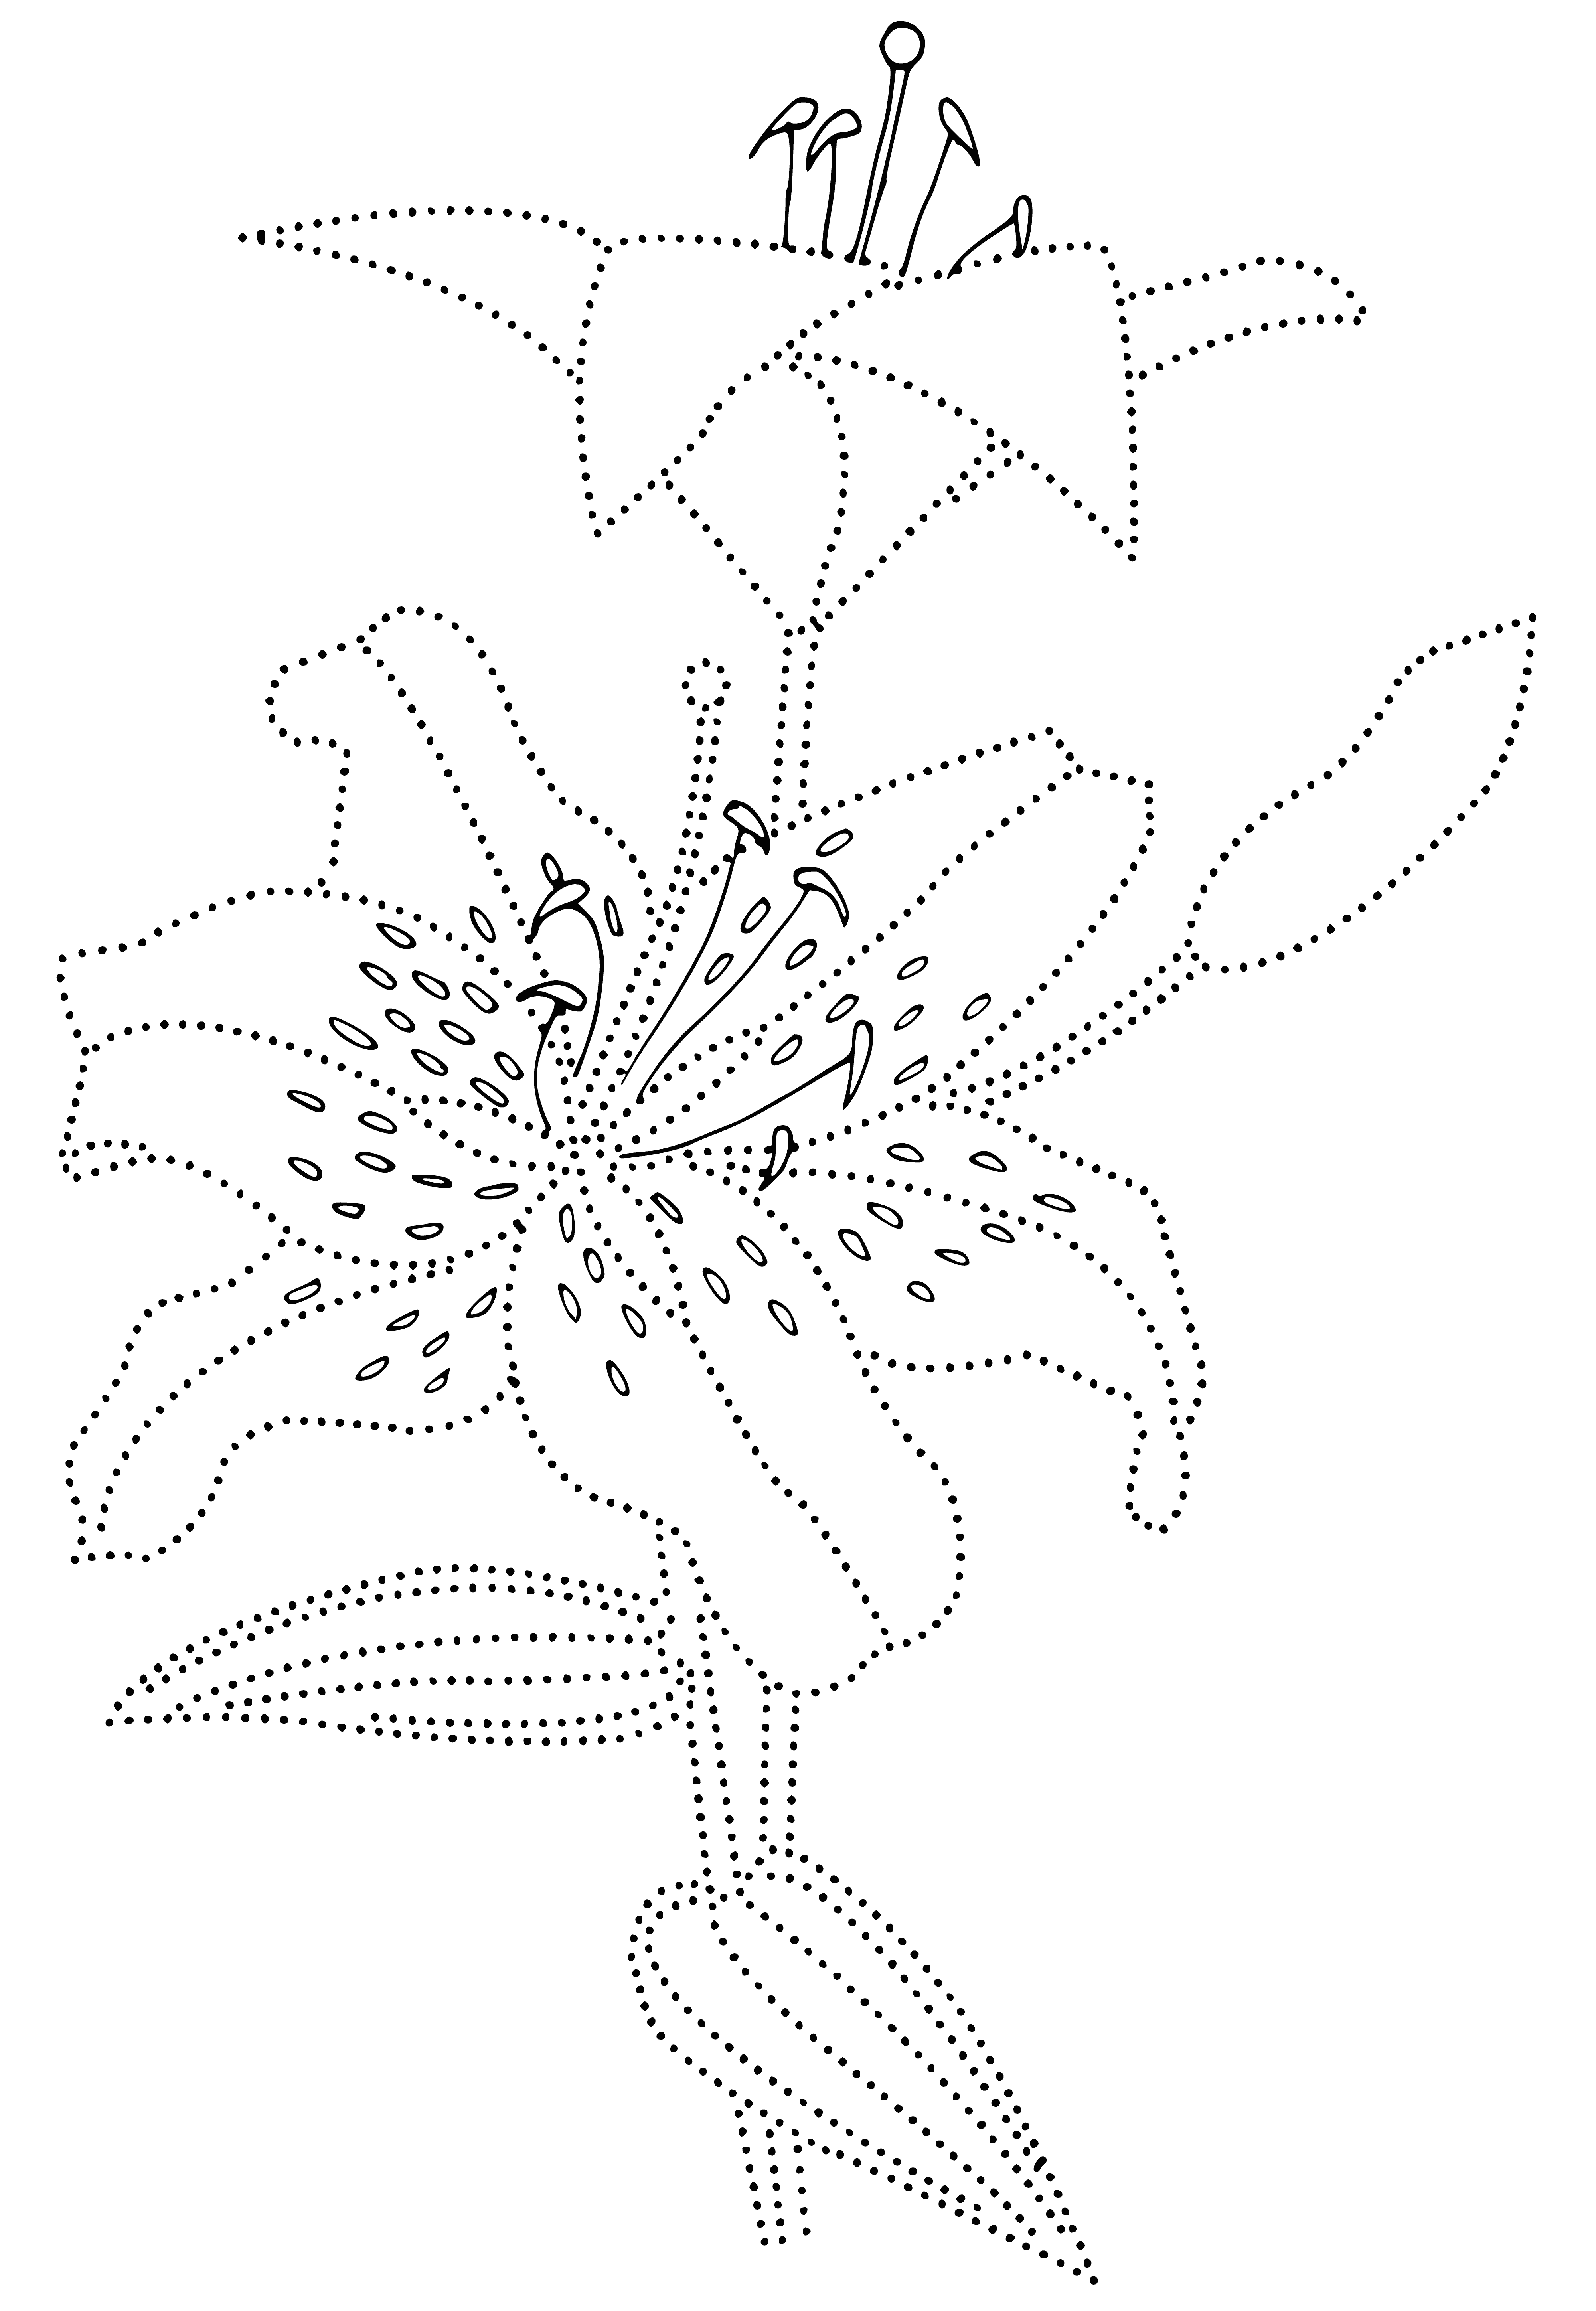 coloring page: A lily is a beautiful flower that has big petals in shades of white, yellow, pink, and purple. It has a sweet smell & blooms in spring/summer.